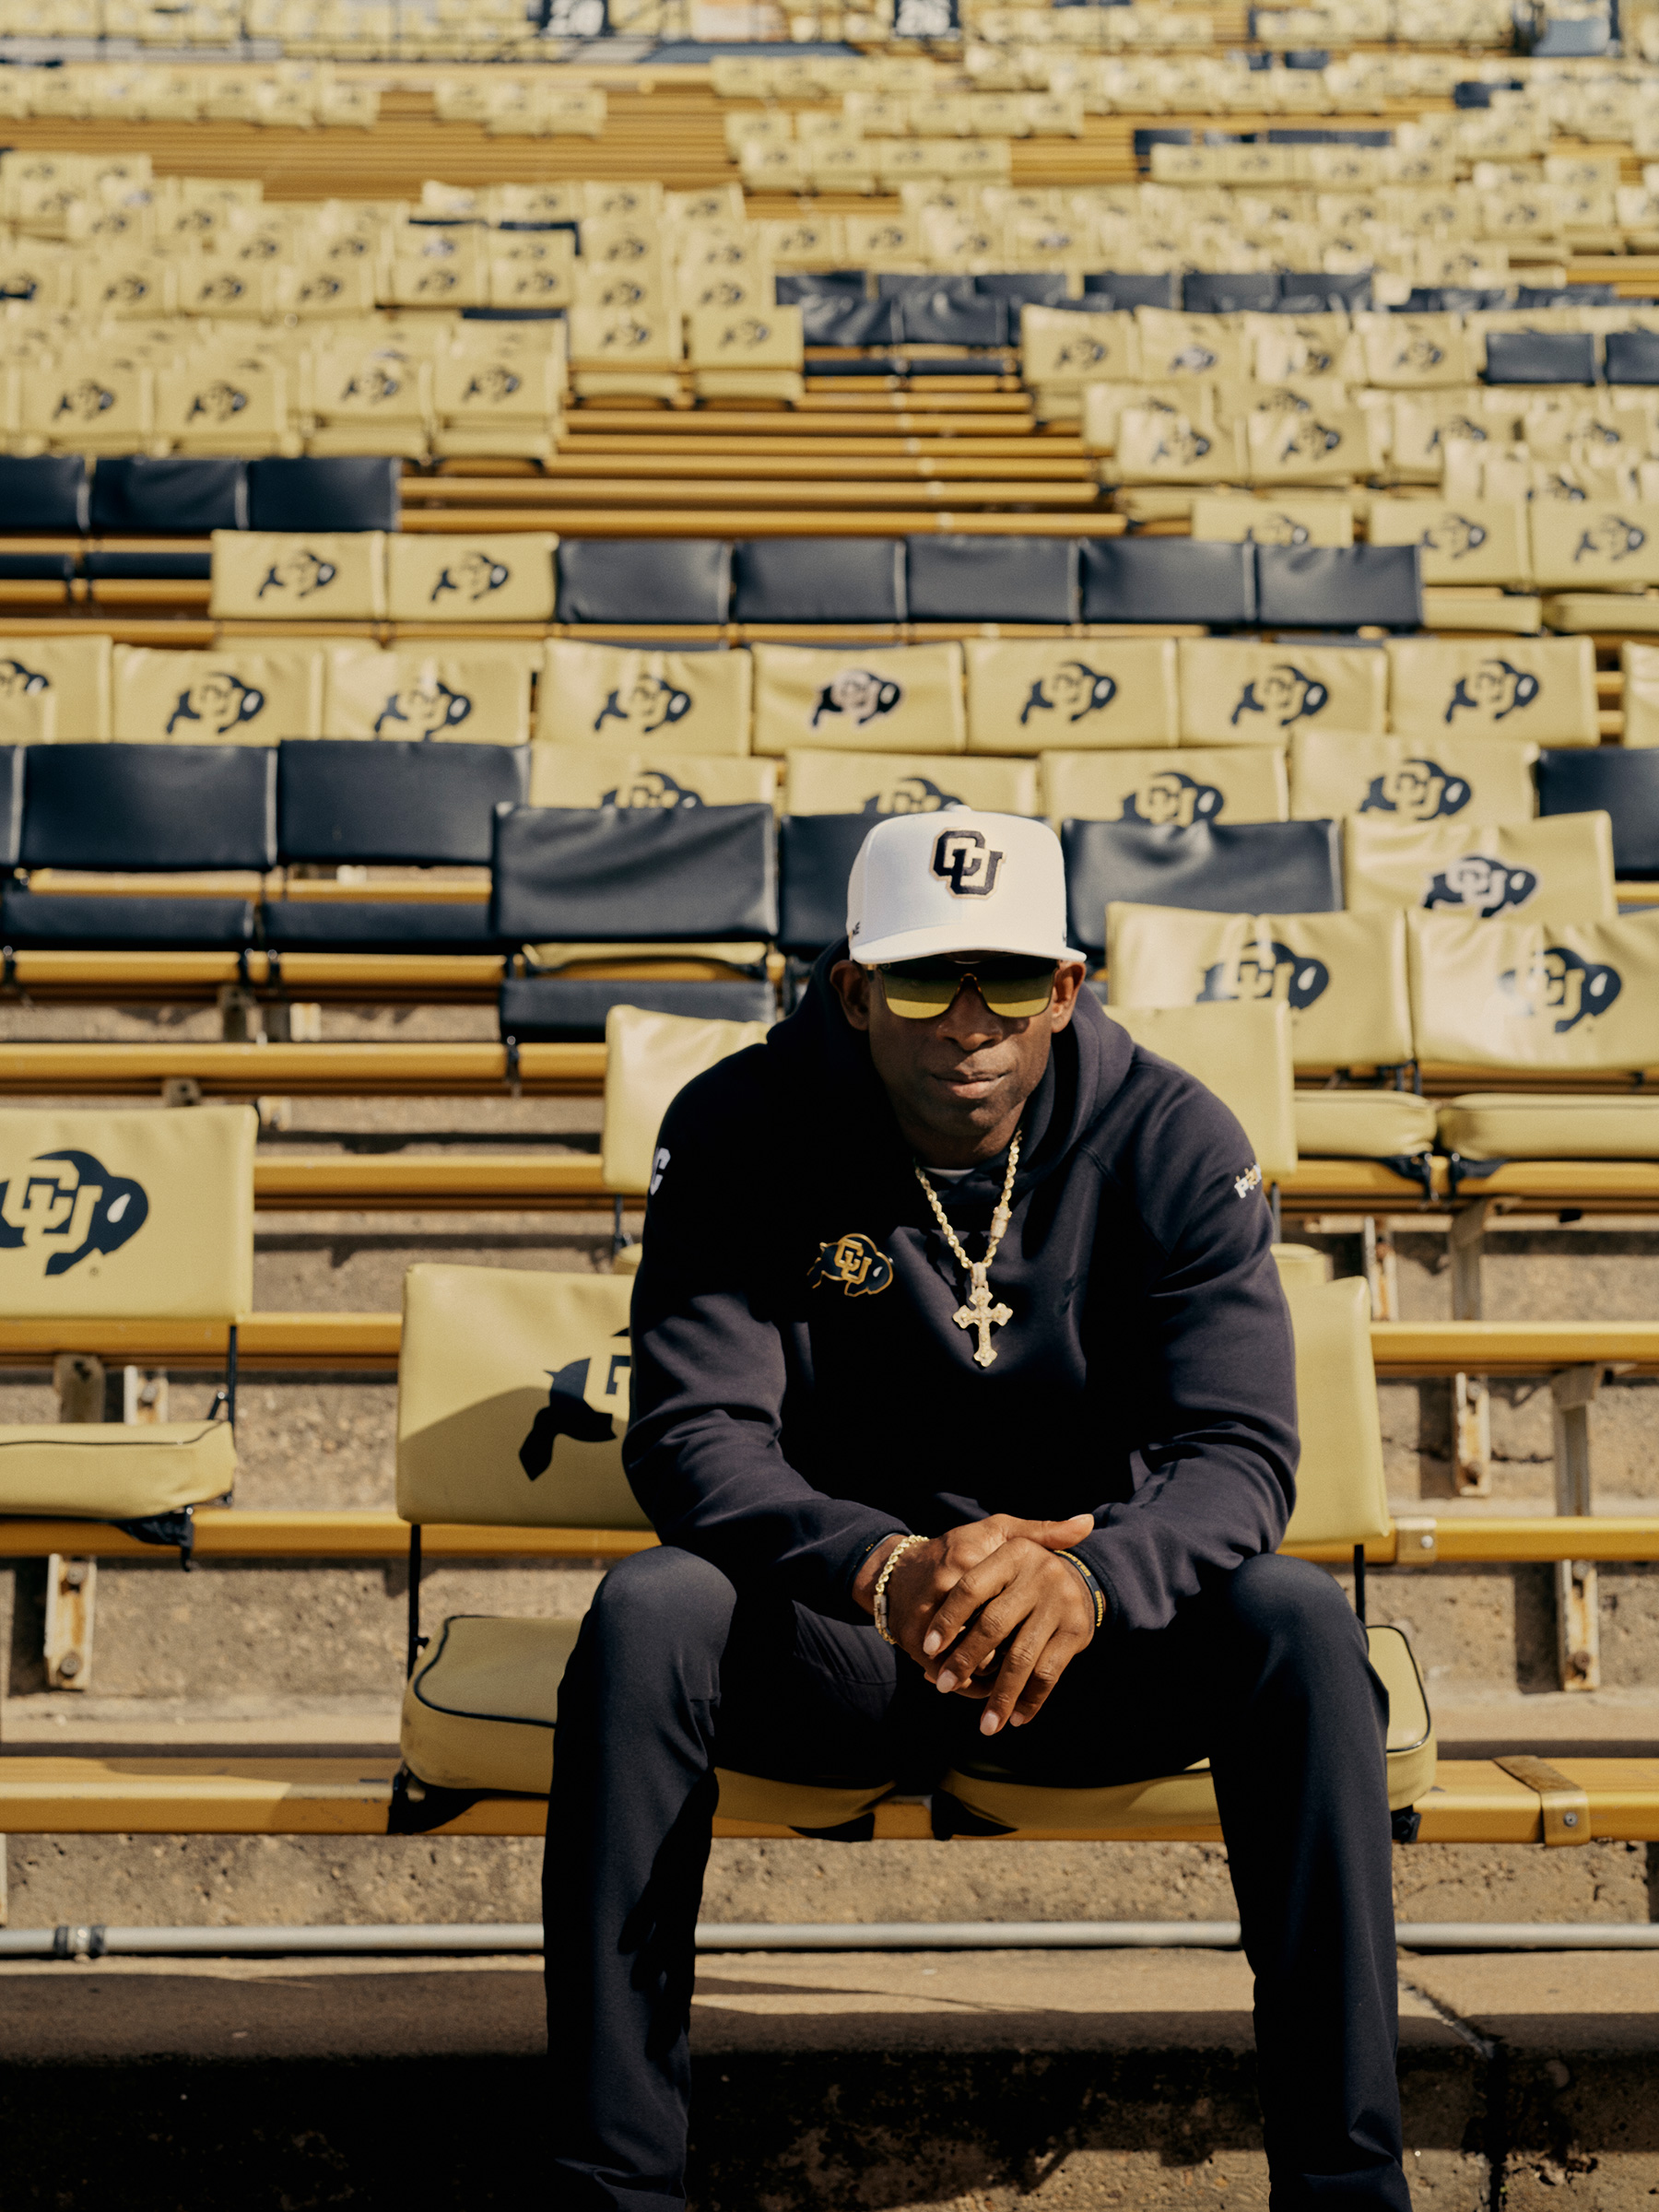 Coach Deion Sanders seated at Folsom Field in the campus of Colorado University